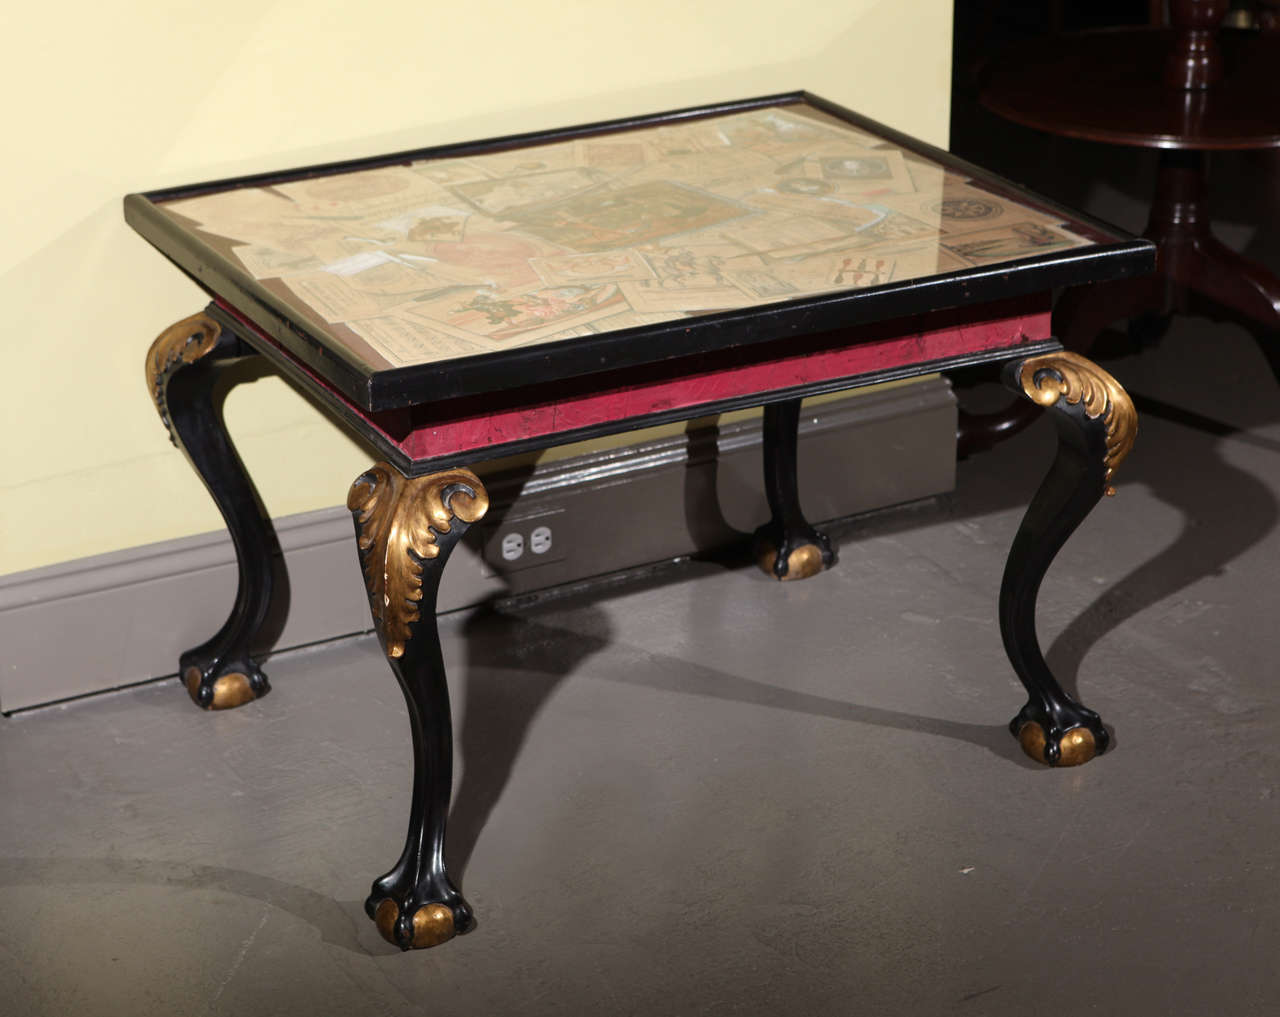 A Spanish Tea Table with ebonized and parcel gilt cabriole legs supporting a tray top beautifully painted in Trompe l'Oeil featuring a grouping of various prints, cards and accessories, c. 1850